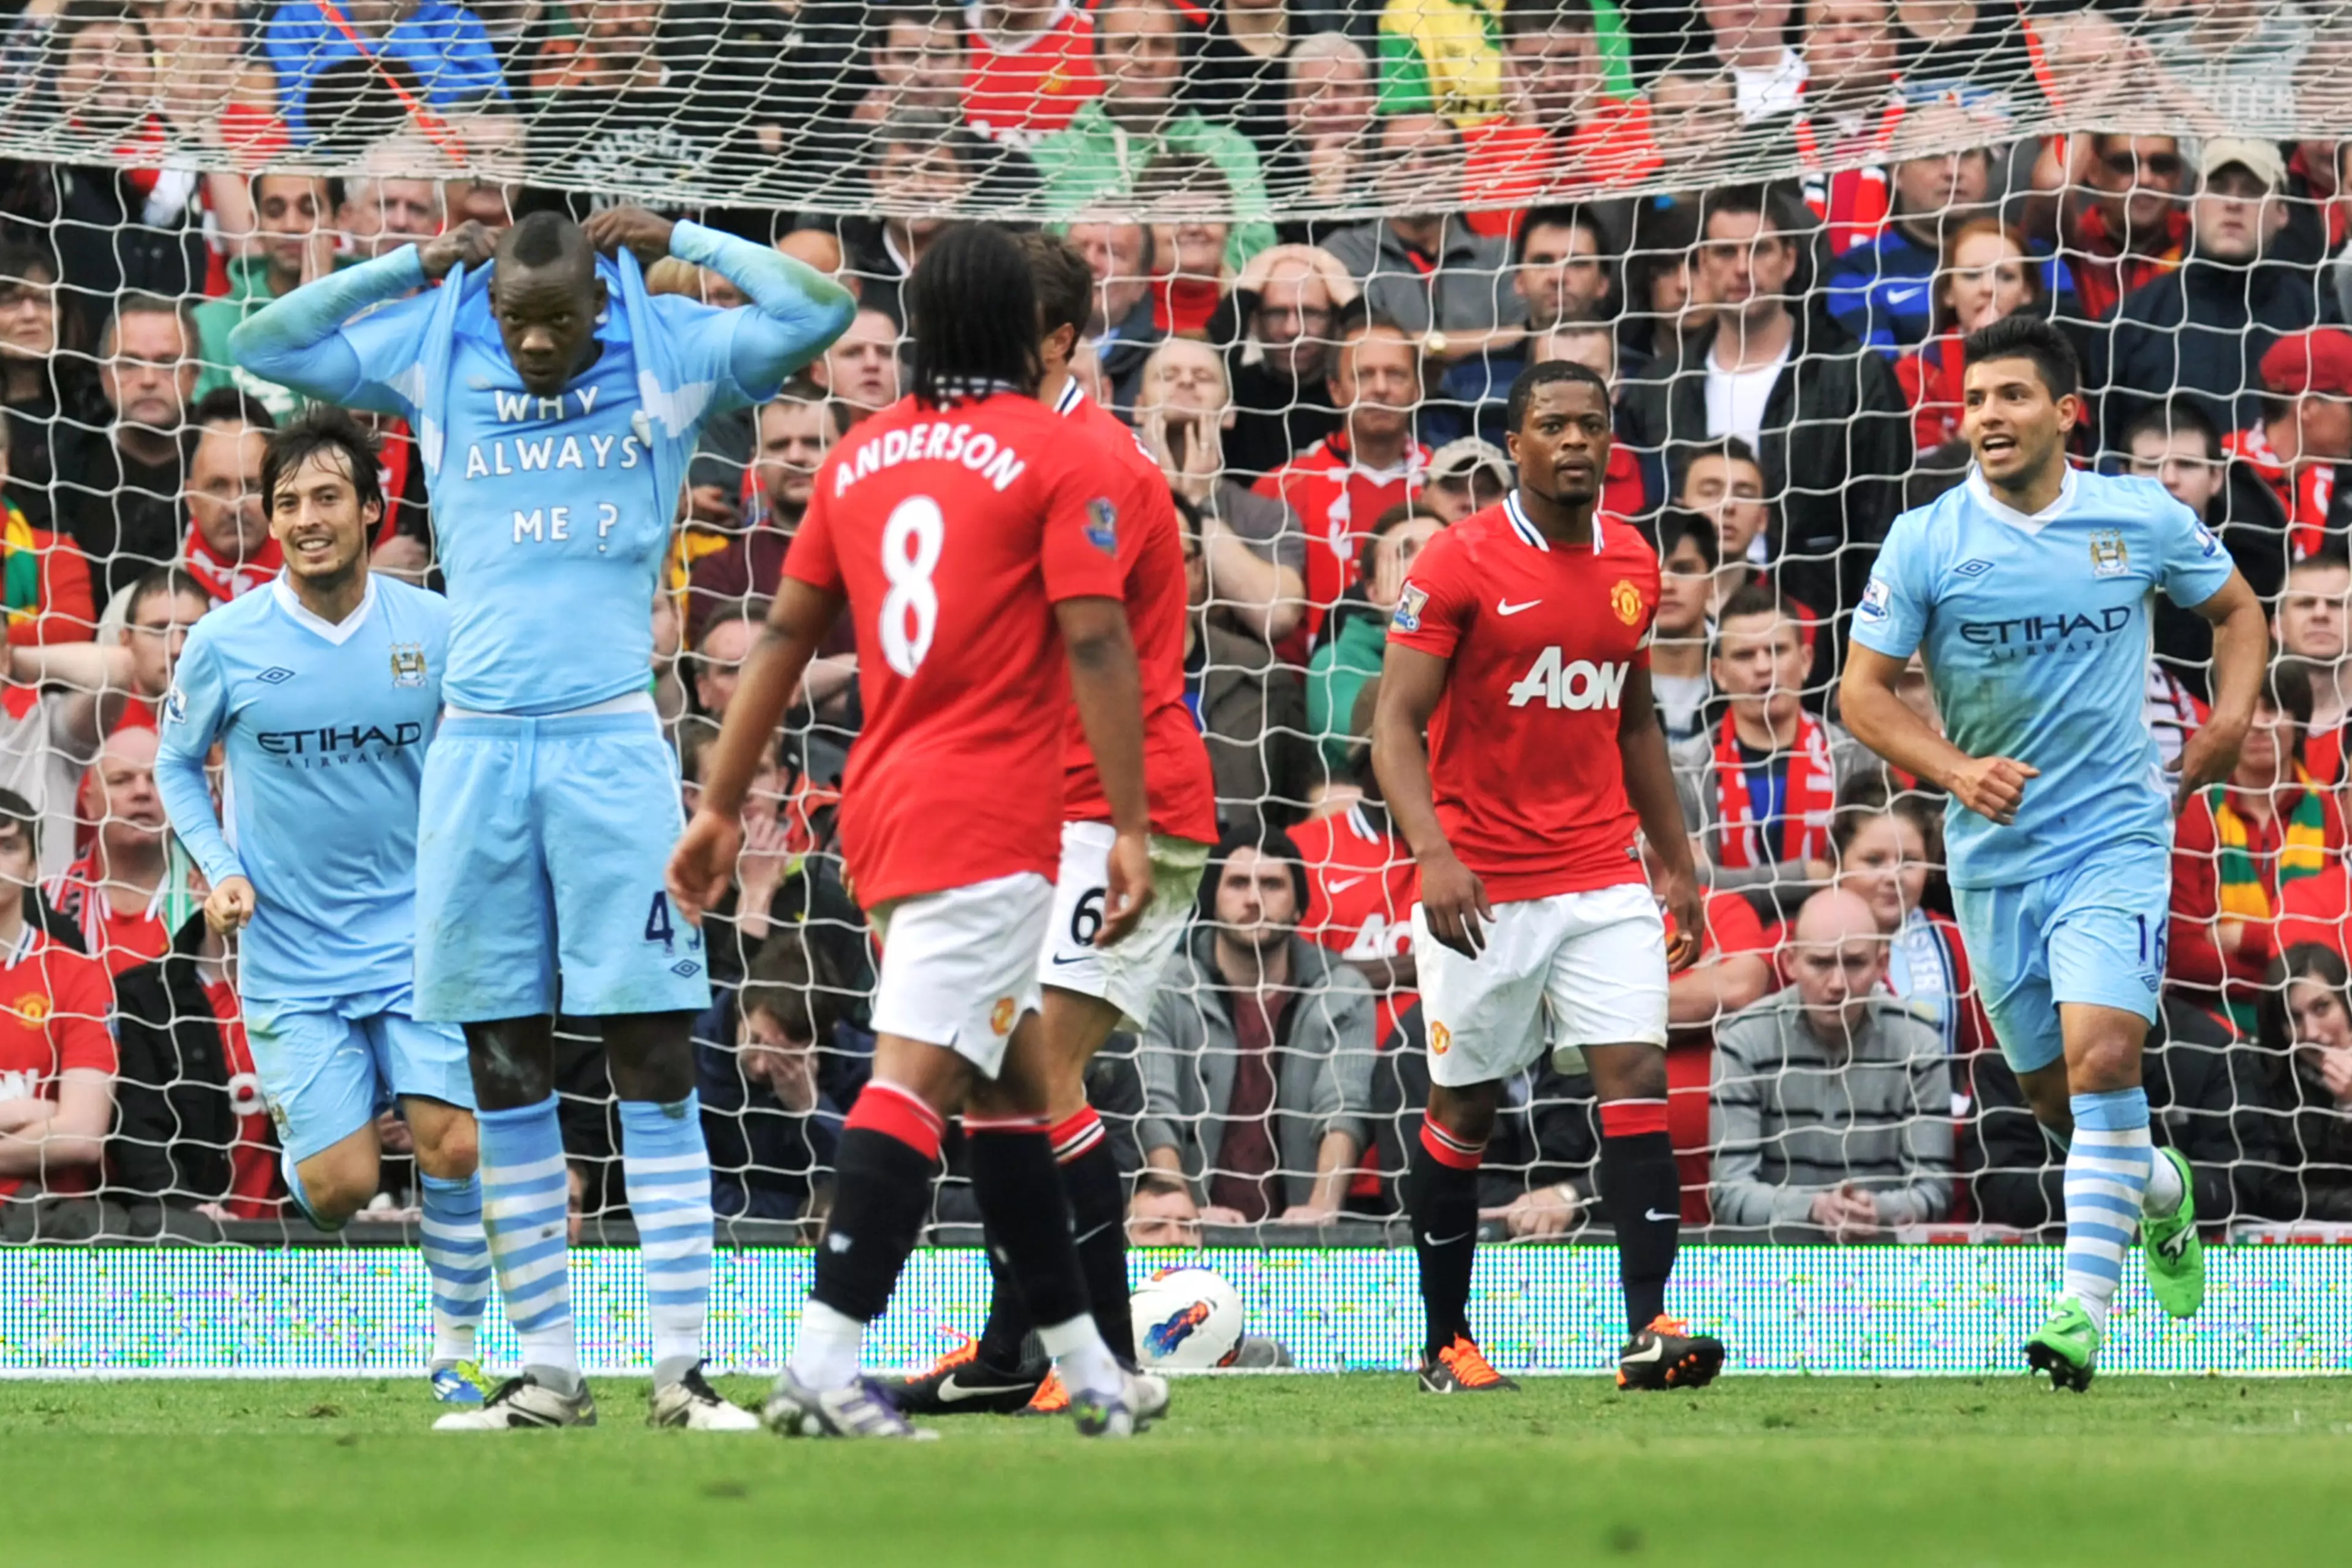 Mario Balotelli scored twice as City ran out 6-1 winners at Old Trafford (Image: PA)